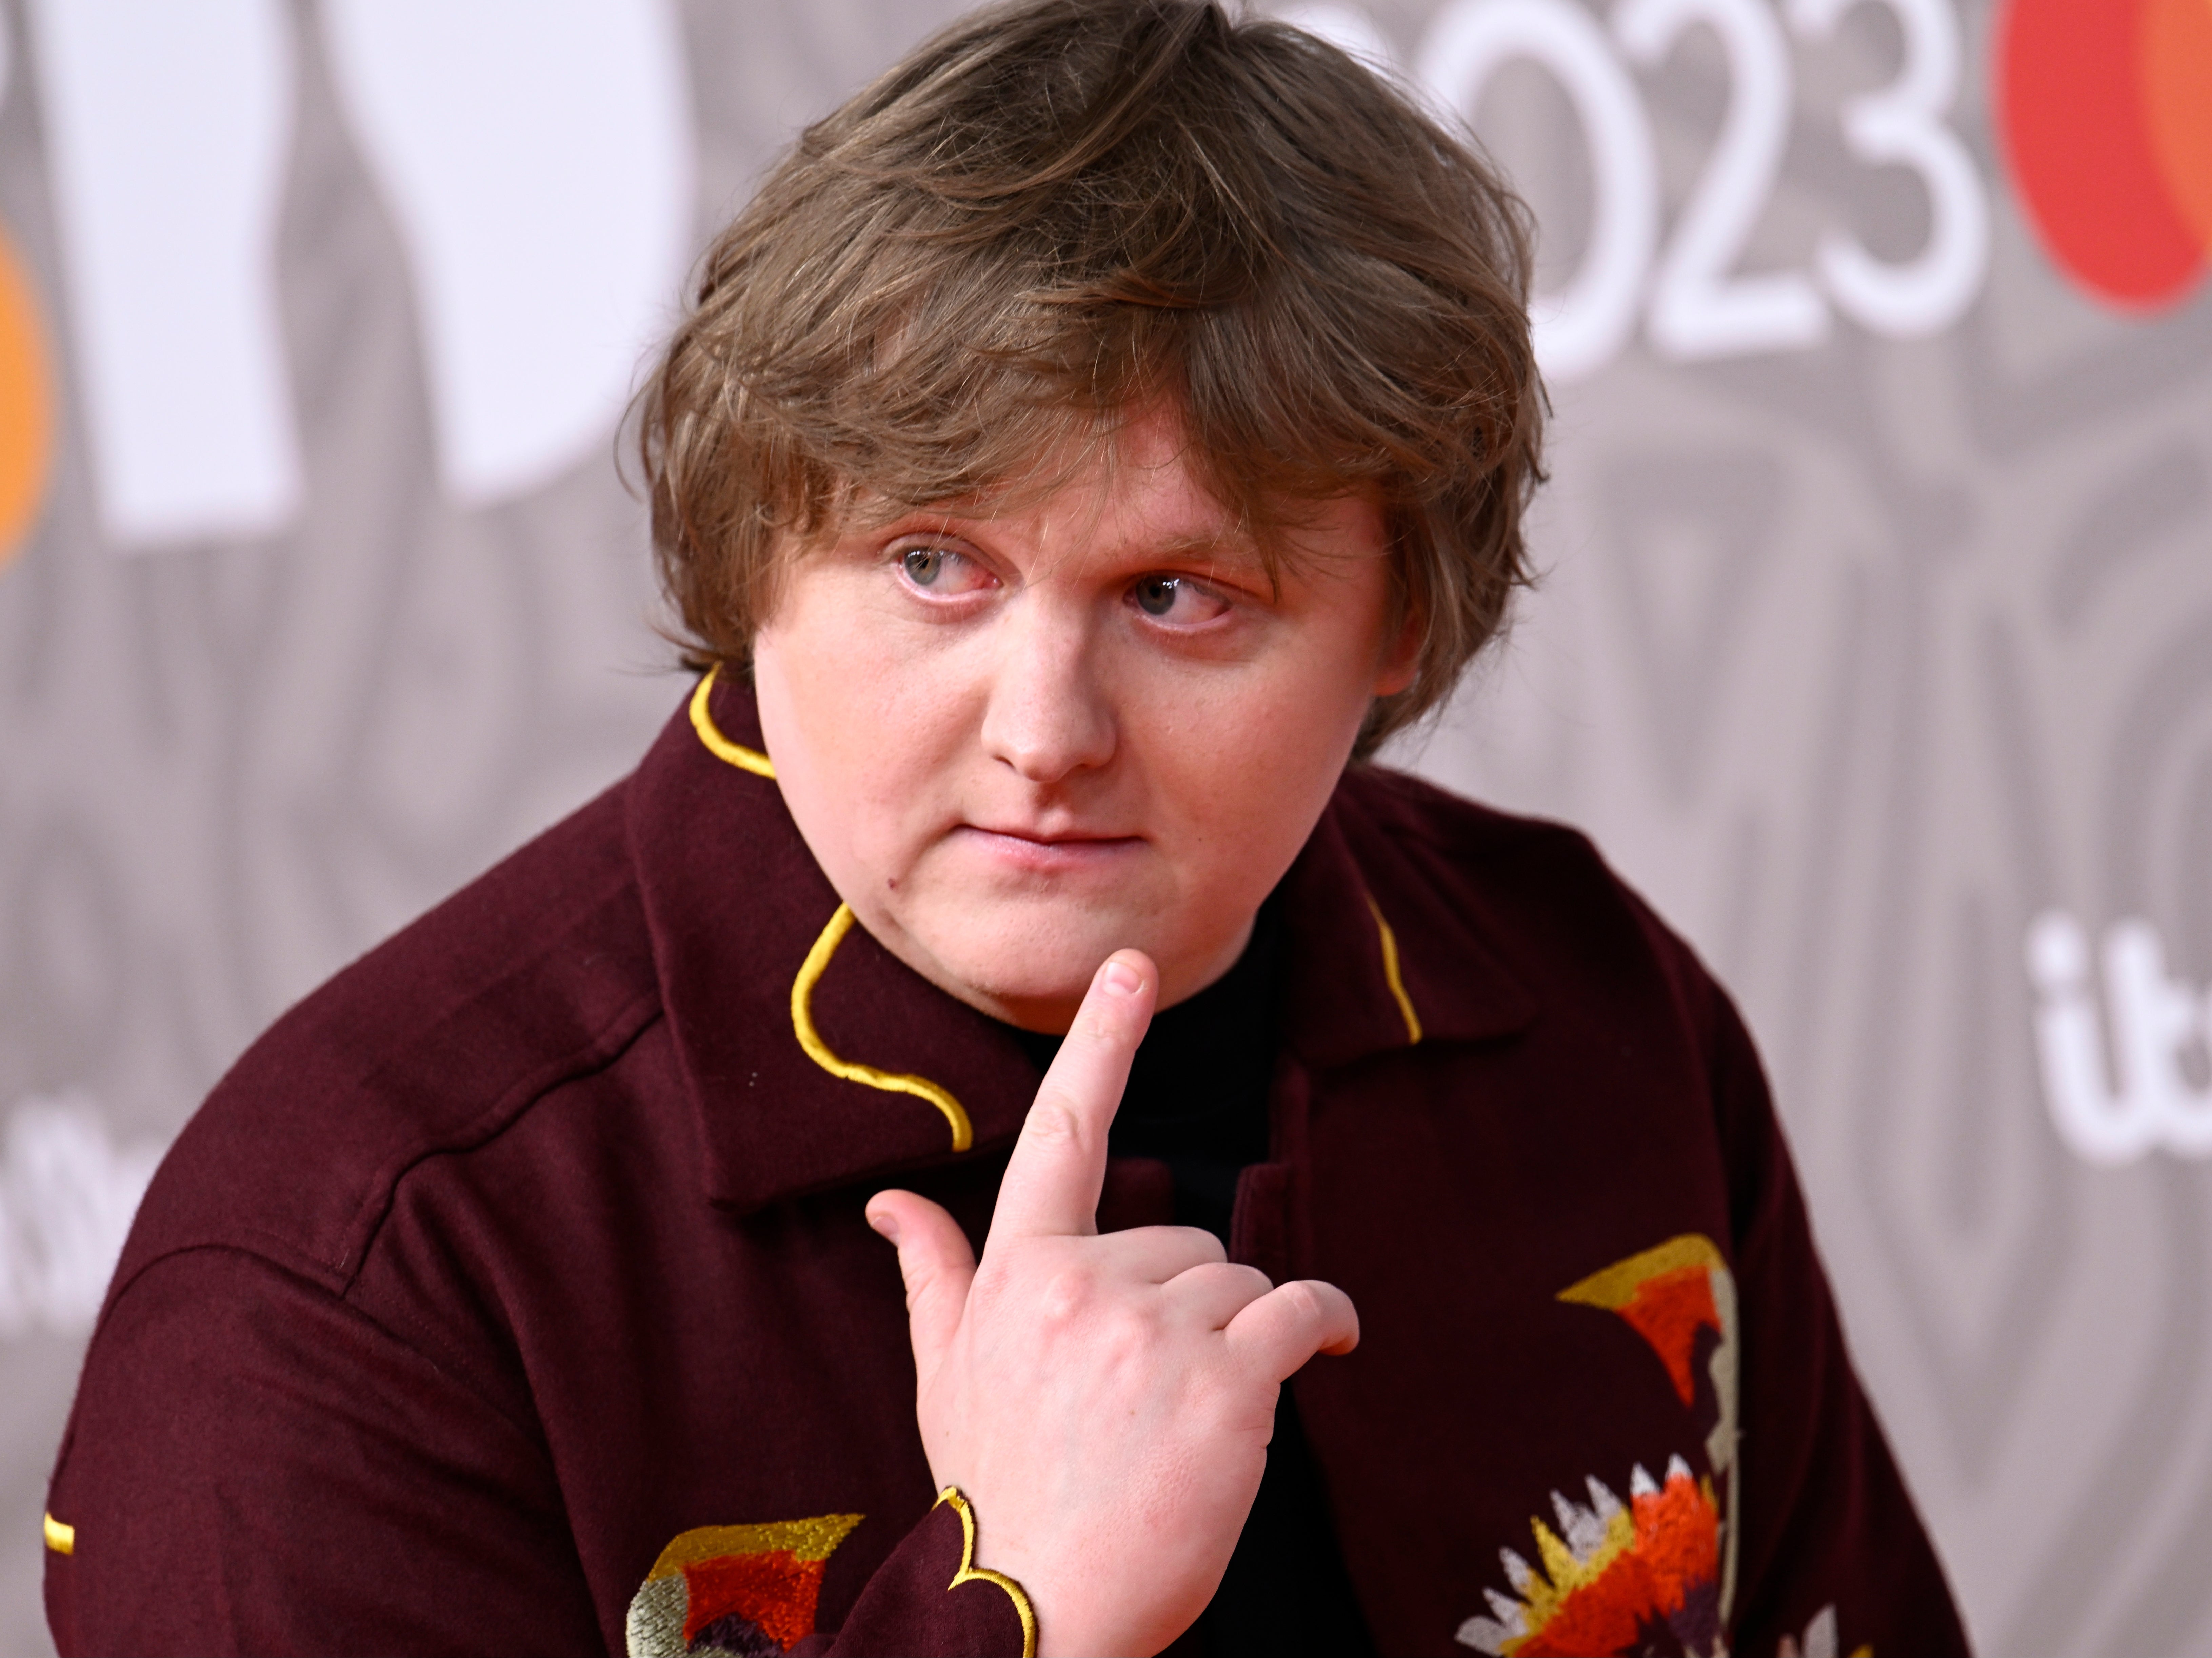 Lewis Capaldi says he might have to quit the music industry